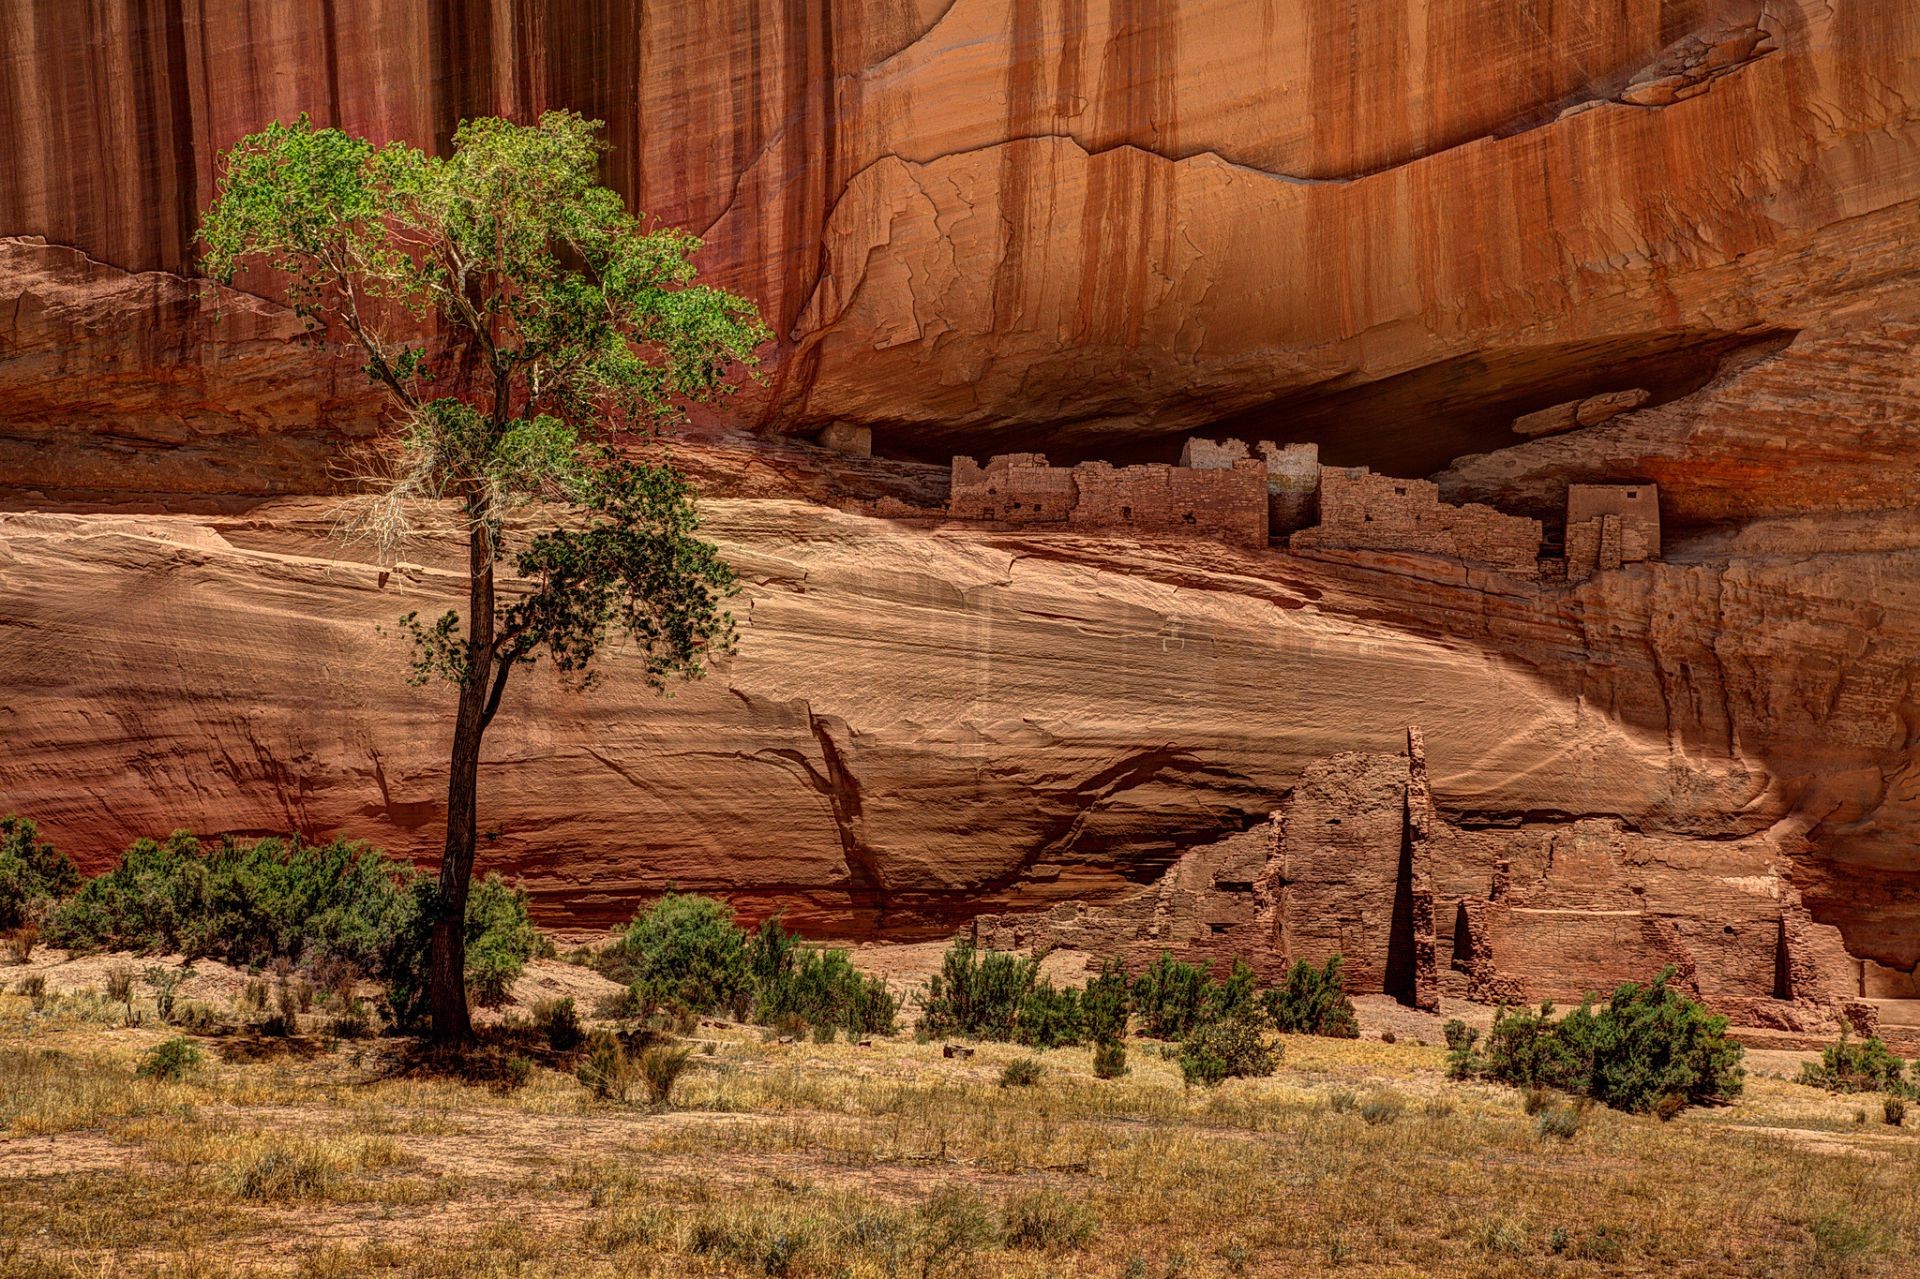 the canyons sandstone travel desert outdoors canyon nature rock landscape park arid geology sand scenic tree dry cliff